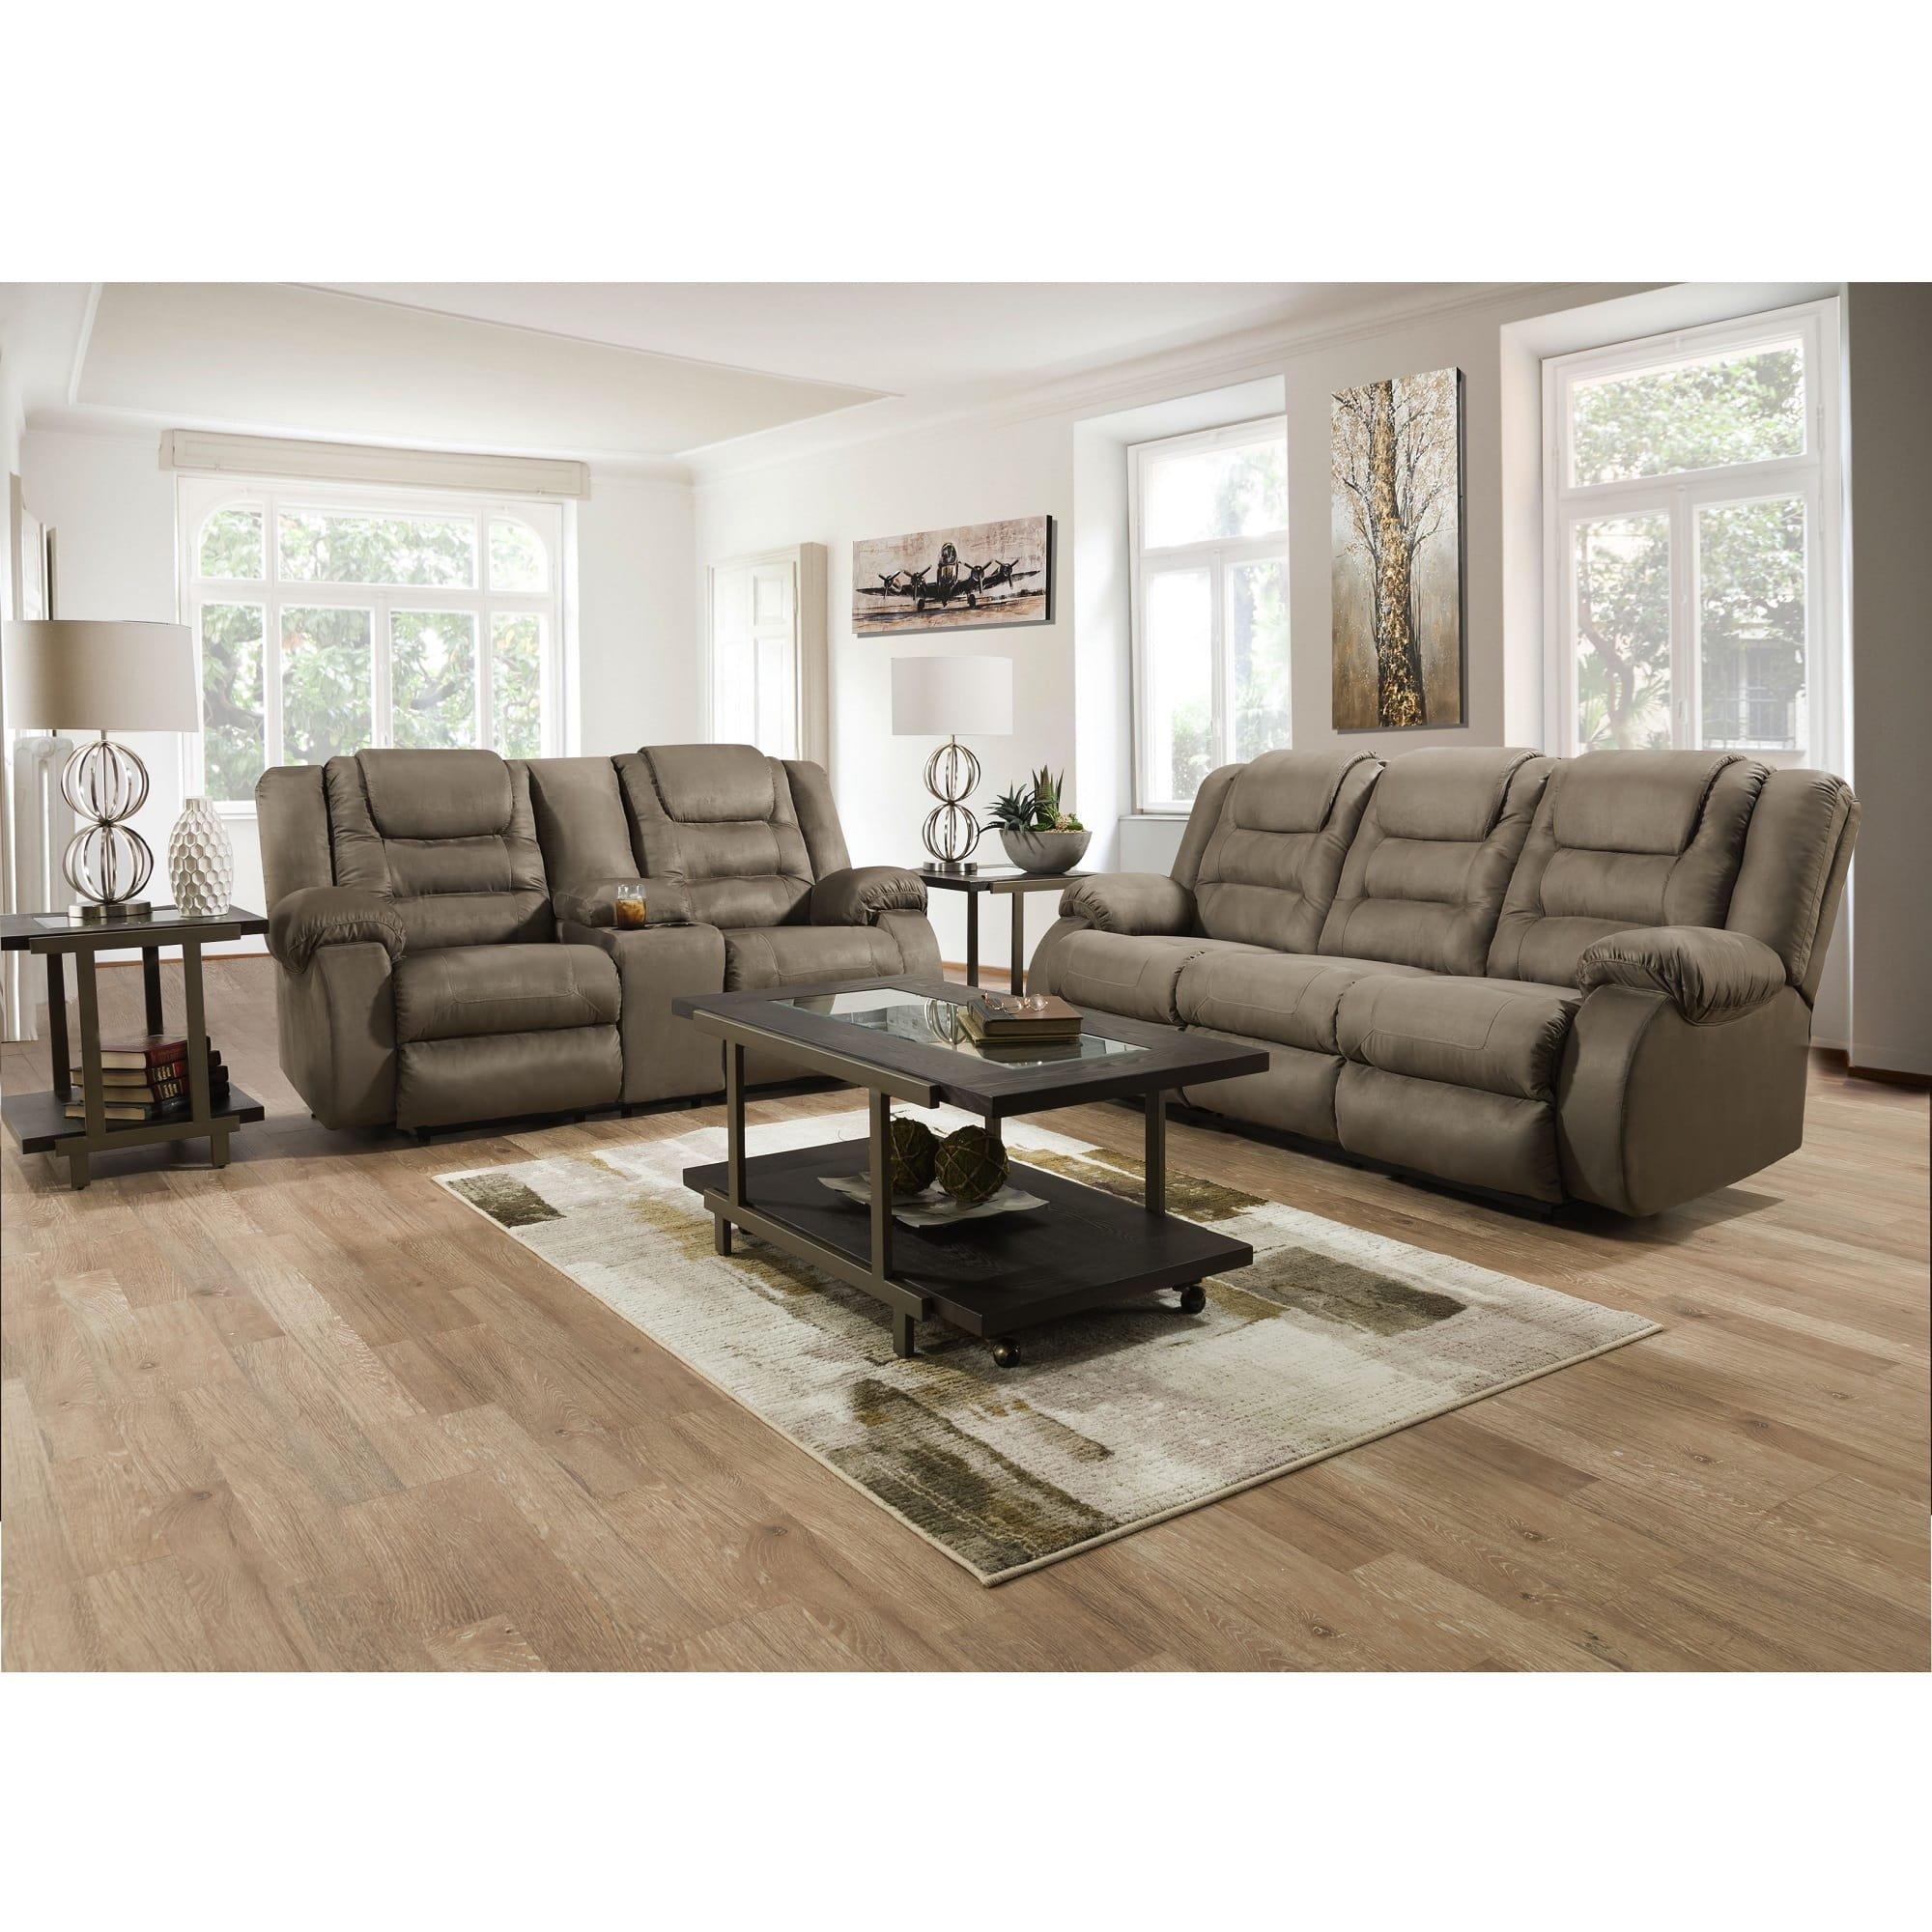 Rent To Own Ashley 2 Piece Sheridan Reclining Living Room Collection At Aarons Today